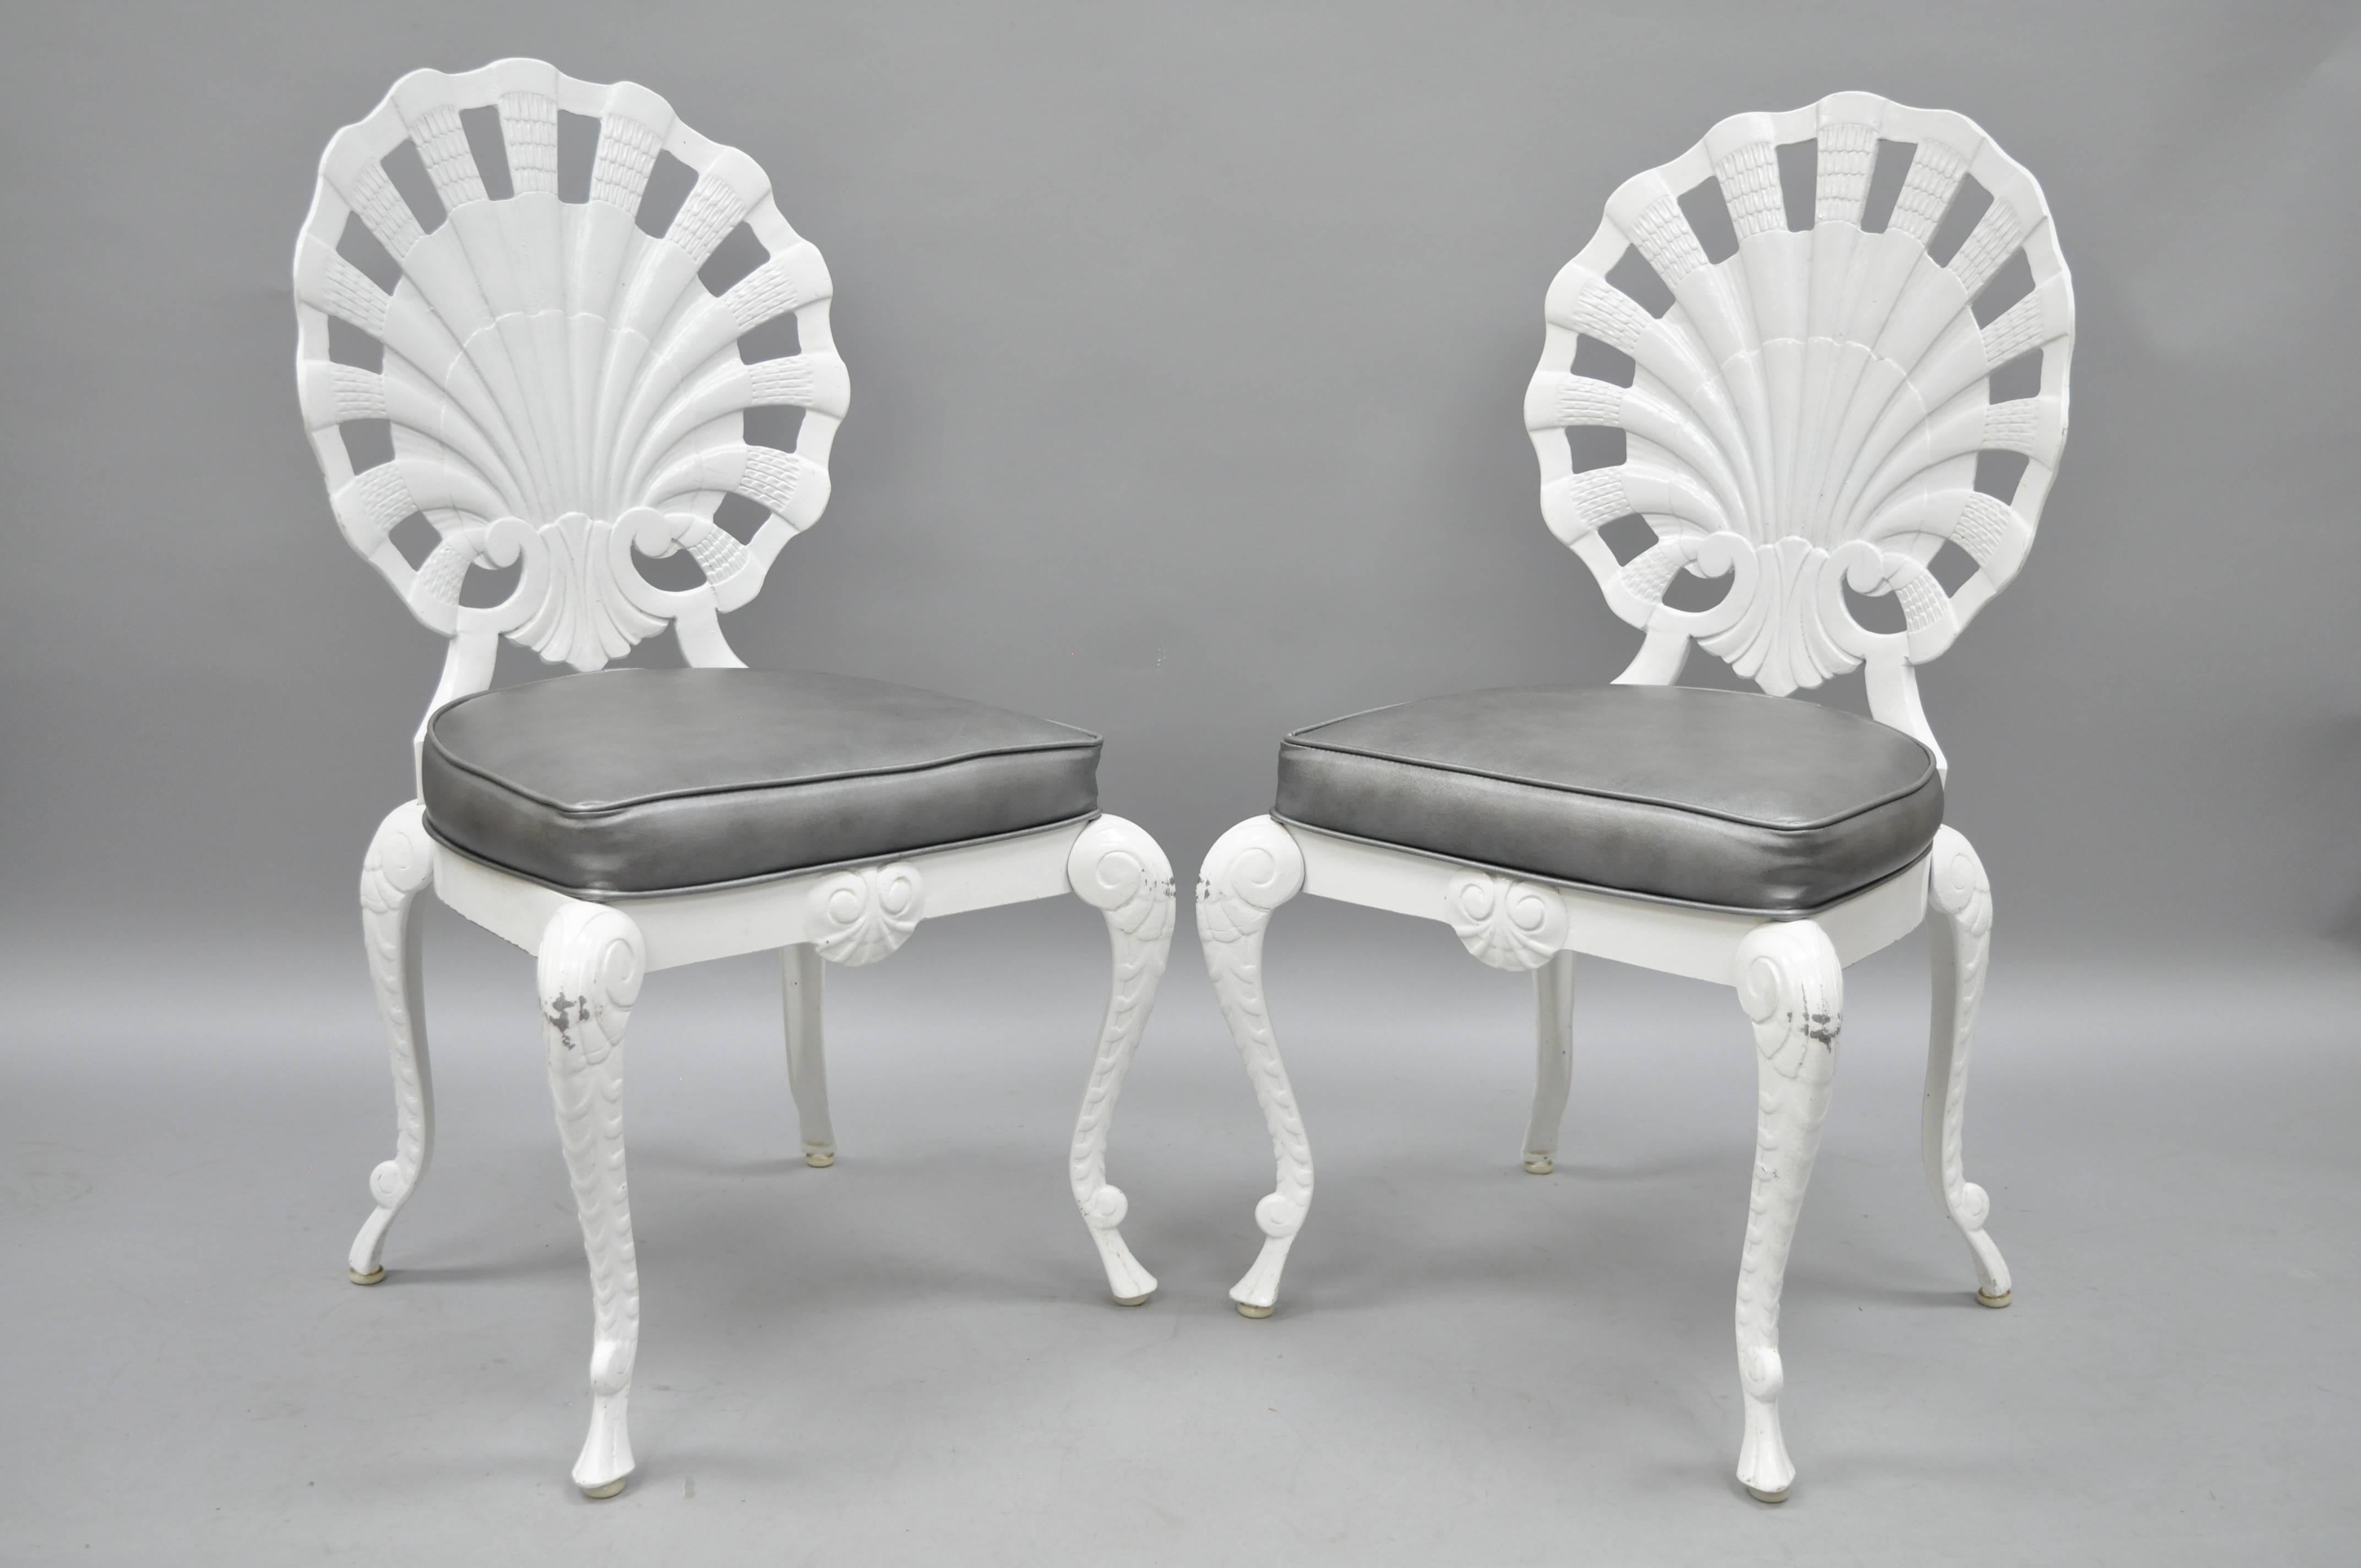 Set of six vintage fan or shell back Grotto style dining chairs by Tropitone. Item features fan or shell form backs, cast aluminium construction, silver vinyl upholstery, original white finish, quality American craftsmanship, Mid-Late 20th Century.